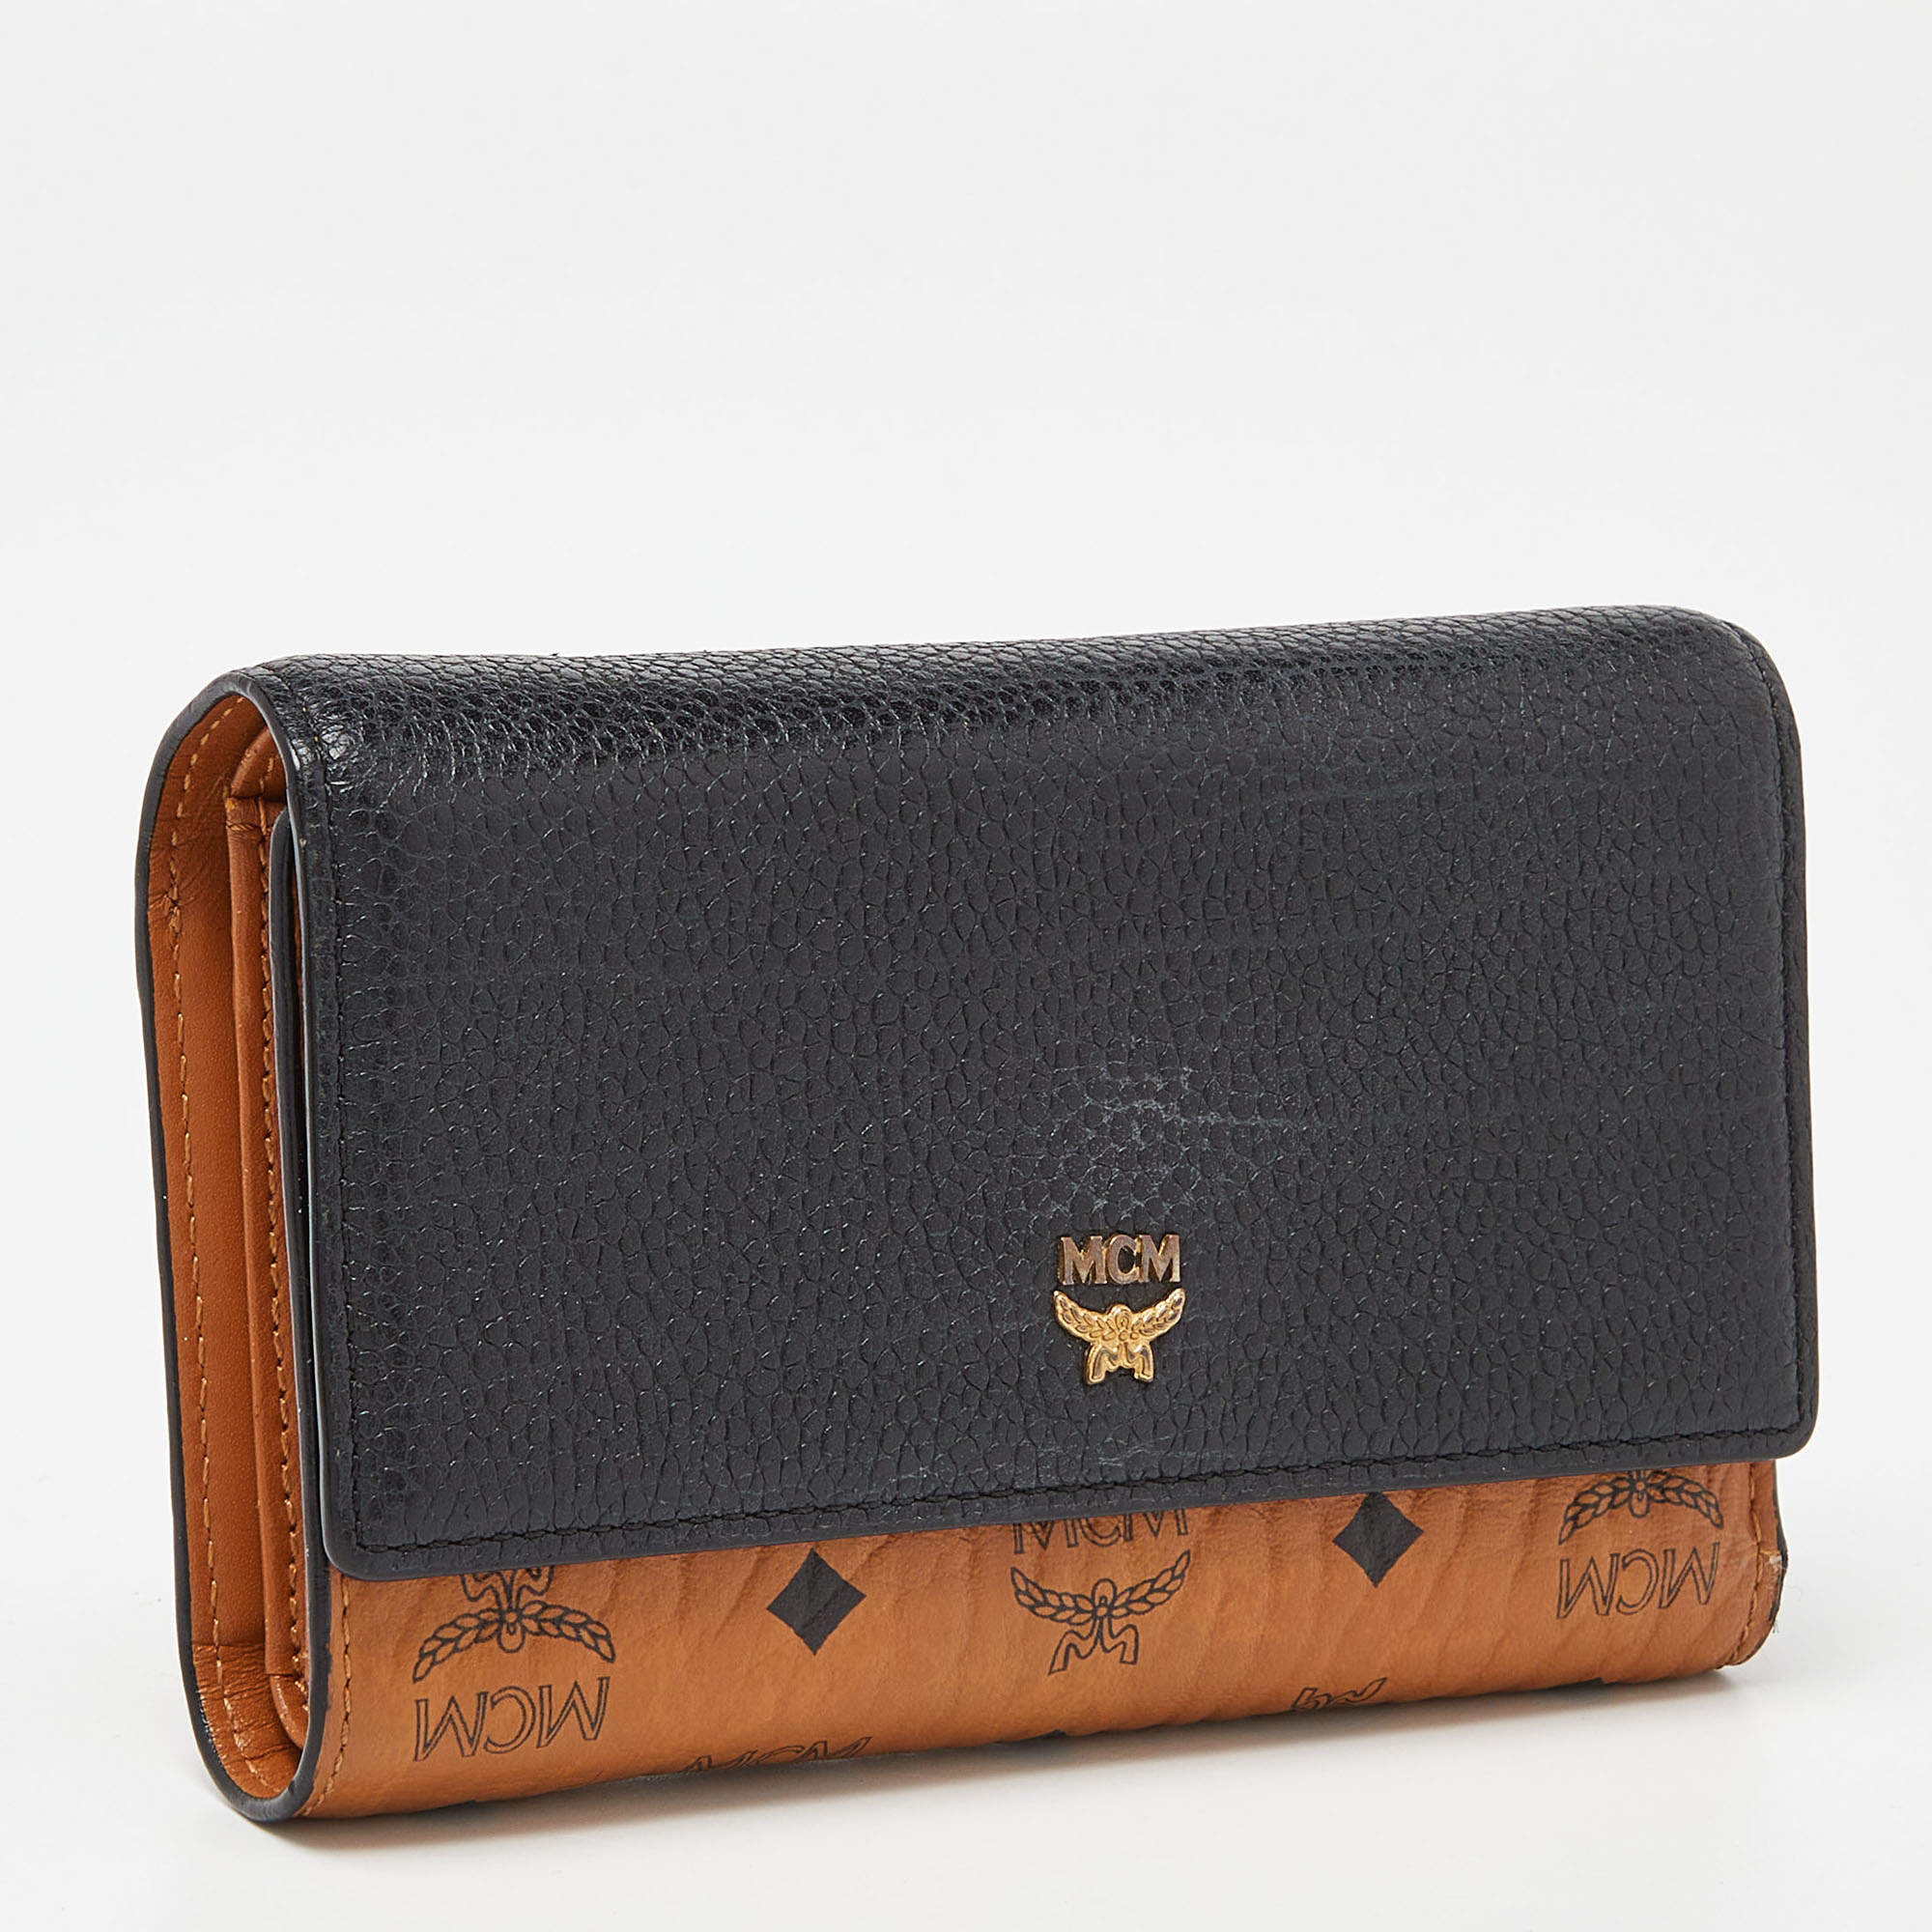 Mcm Cognac/Black Visetos Coated Canvas and Leather Flap Trifold Wallet